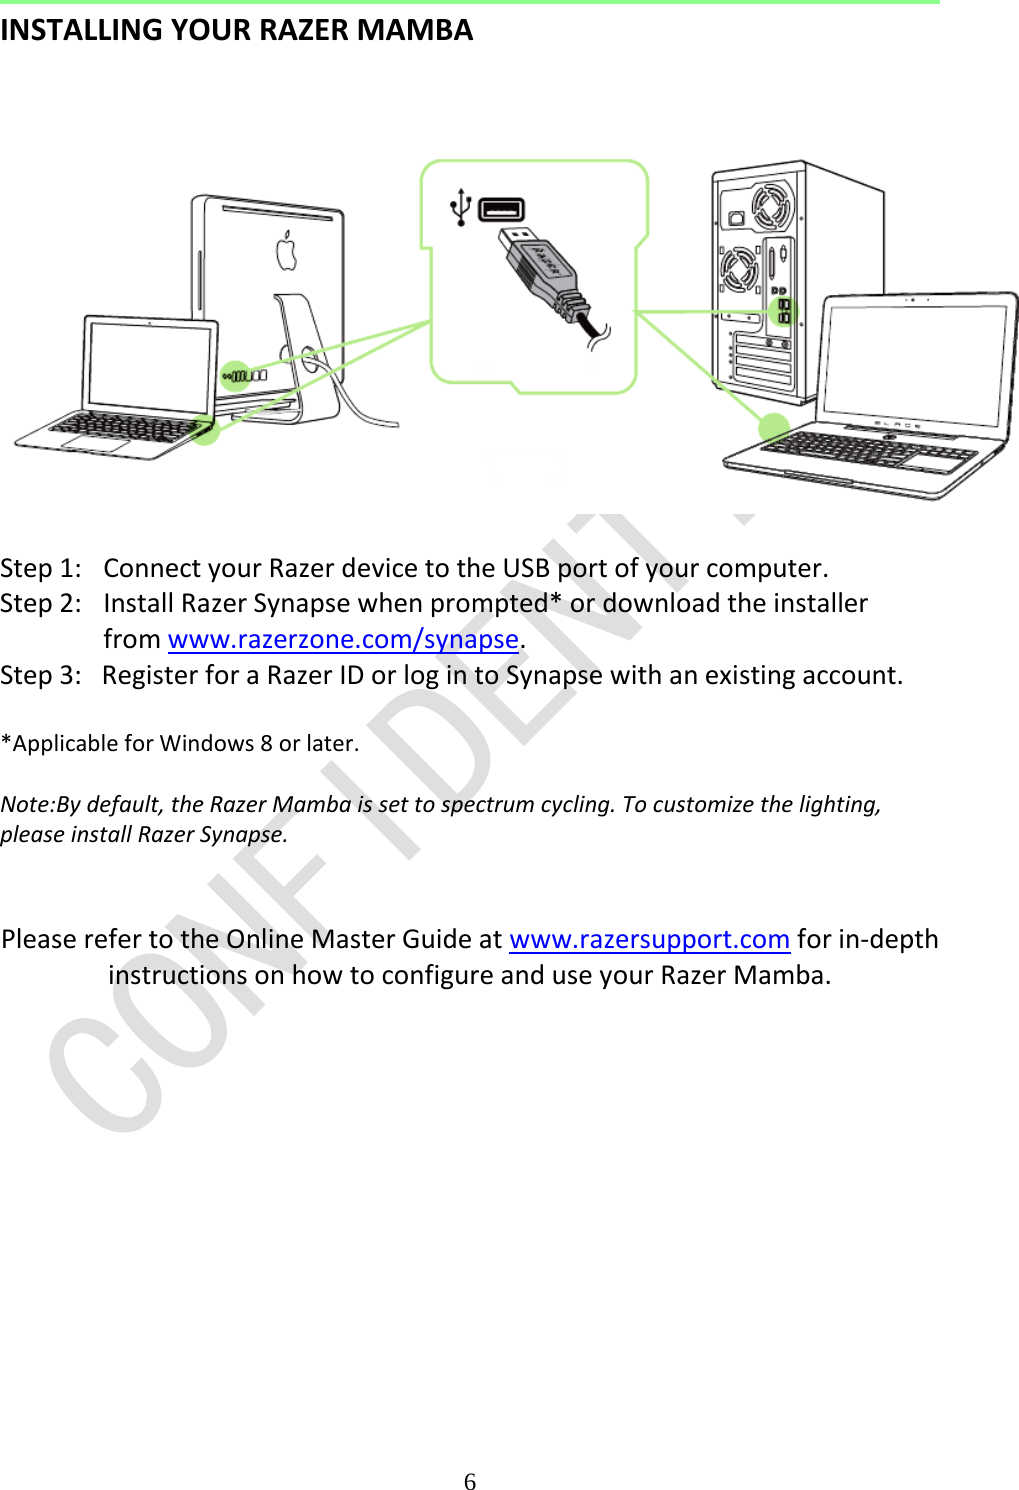  6  INSTALLING YOUR RAZER MAMBA     Step 1:  Connect your Razer device to the USB port of your computer.  Step 2:  Install Razer Synapse when prompted* or download the installer from www.razerzone.com/synapse.  Step 3:   Register for a Razer ID or log in to Synapse with an existing account.  *Applicable for Windows 8 or later.  Note:By default, the Razer Mamba is set to spectrum cycling. To customize the lighting, please install Razer Synapse.   Please refer to the Online Master Guide at www.razersupport.com for in-depth instructions on how to configure and use your Razer Mamba.    